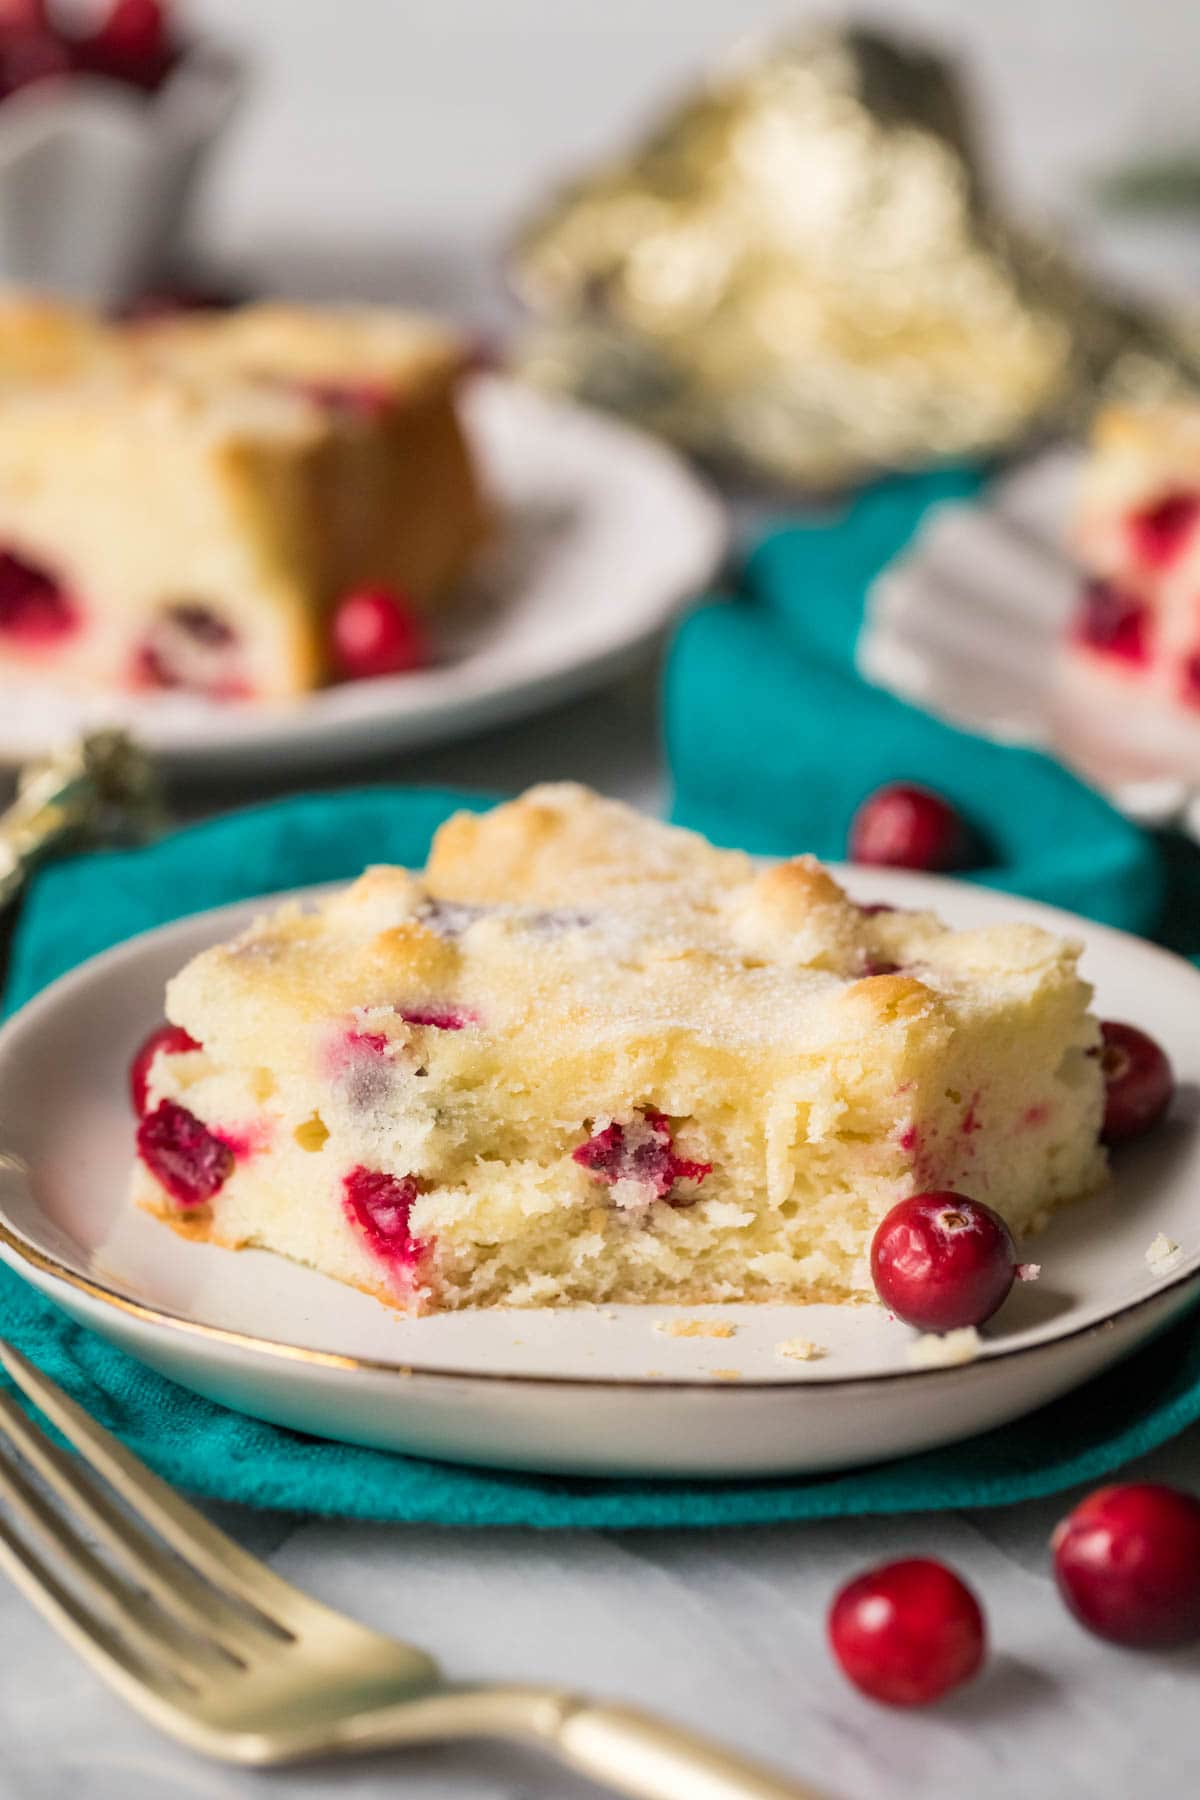 Square slice of cake made with fresh cranberries on a plate with one bite missing.